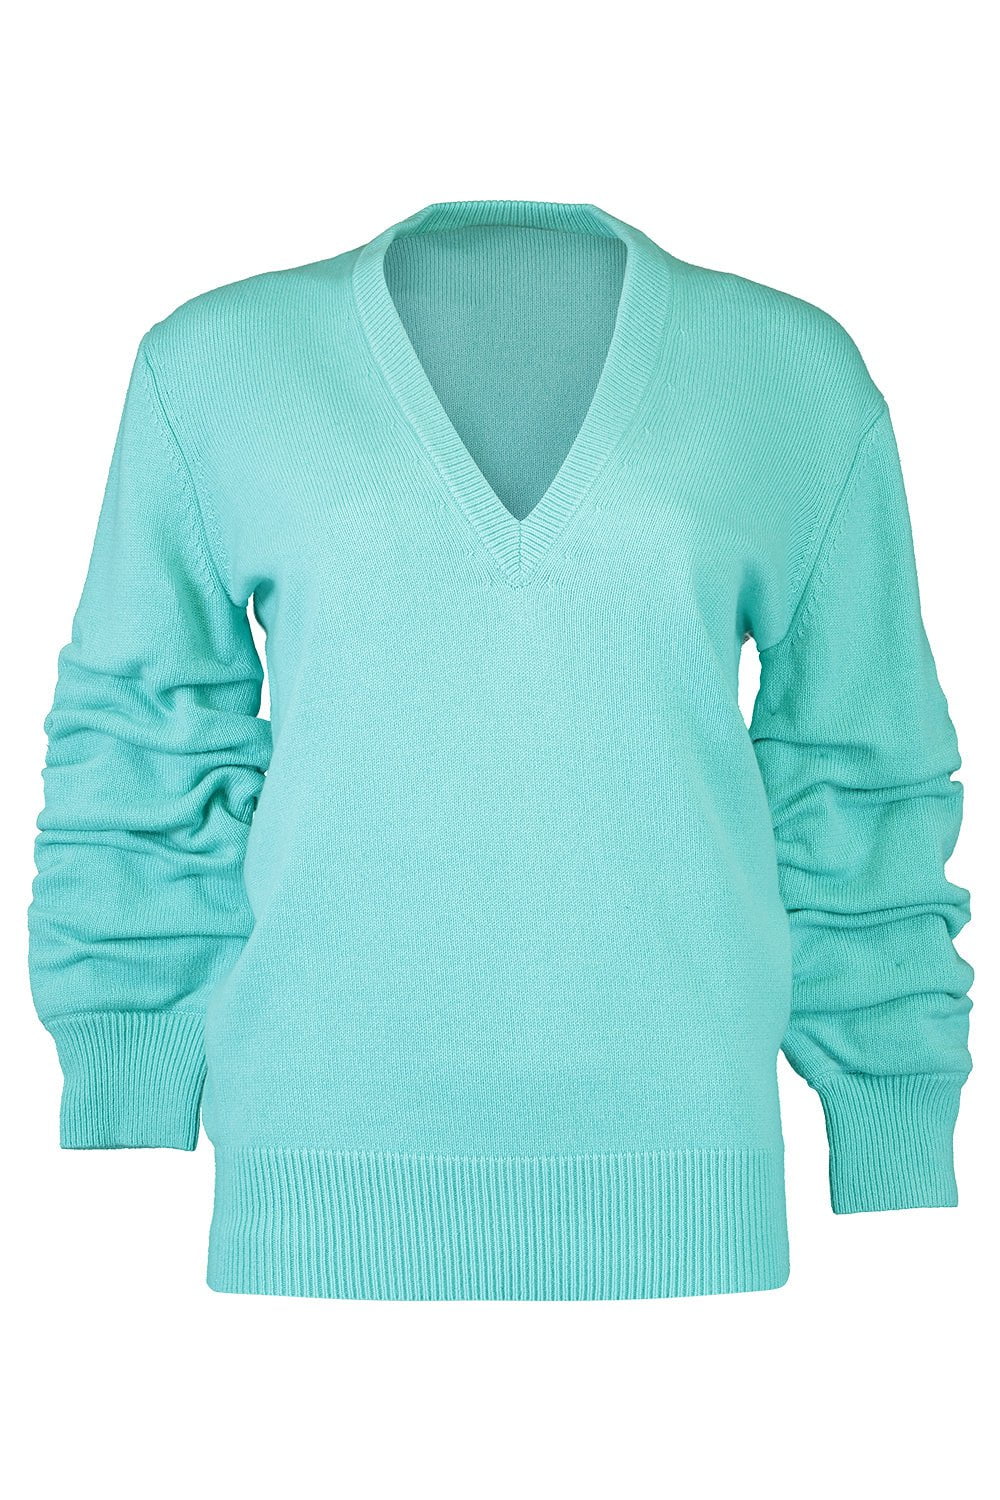 MICHAEL KORS-Ruched Sleeve Pullover-